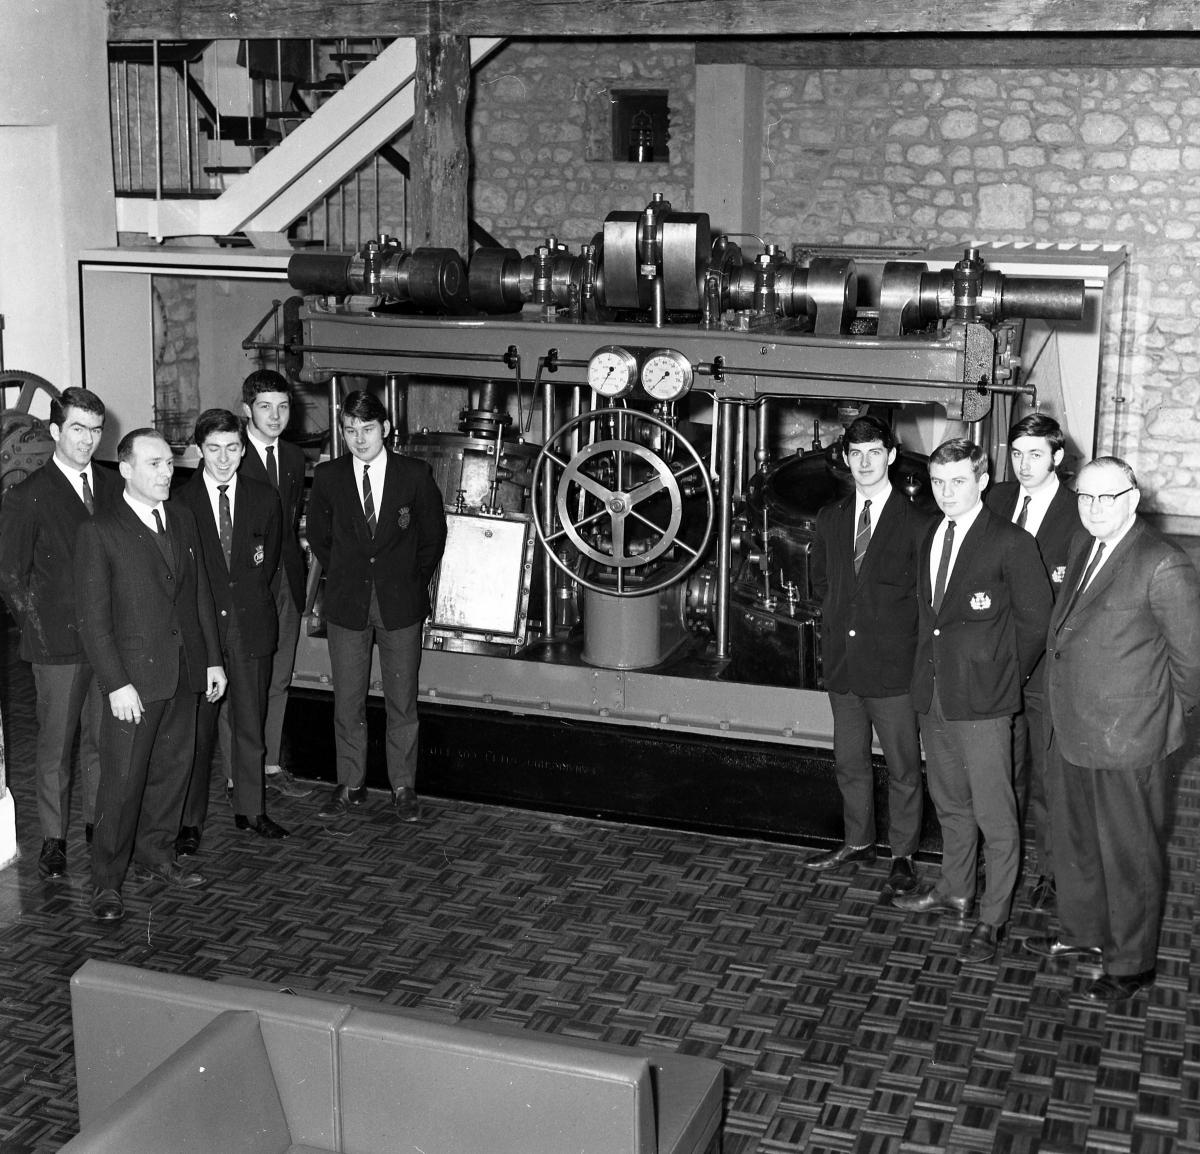 An oscillating engine in the museum in 1968.